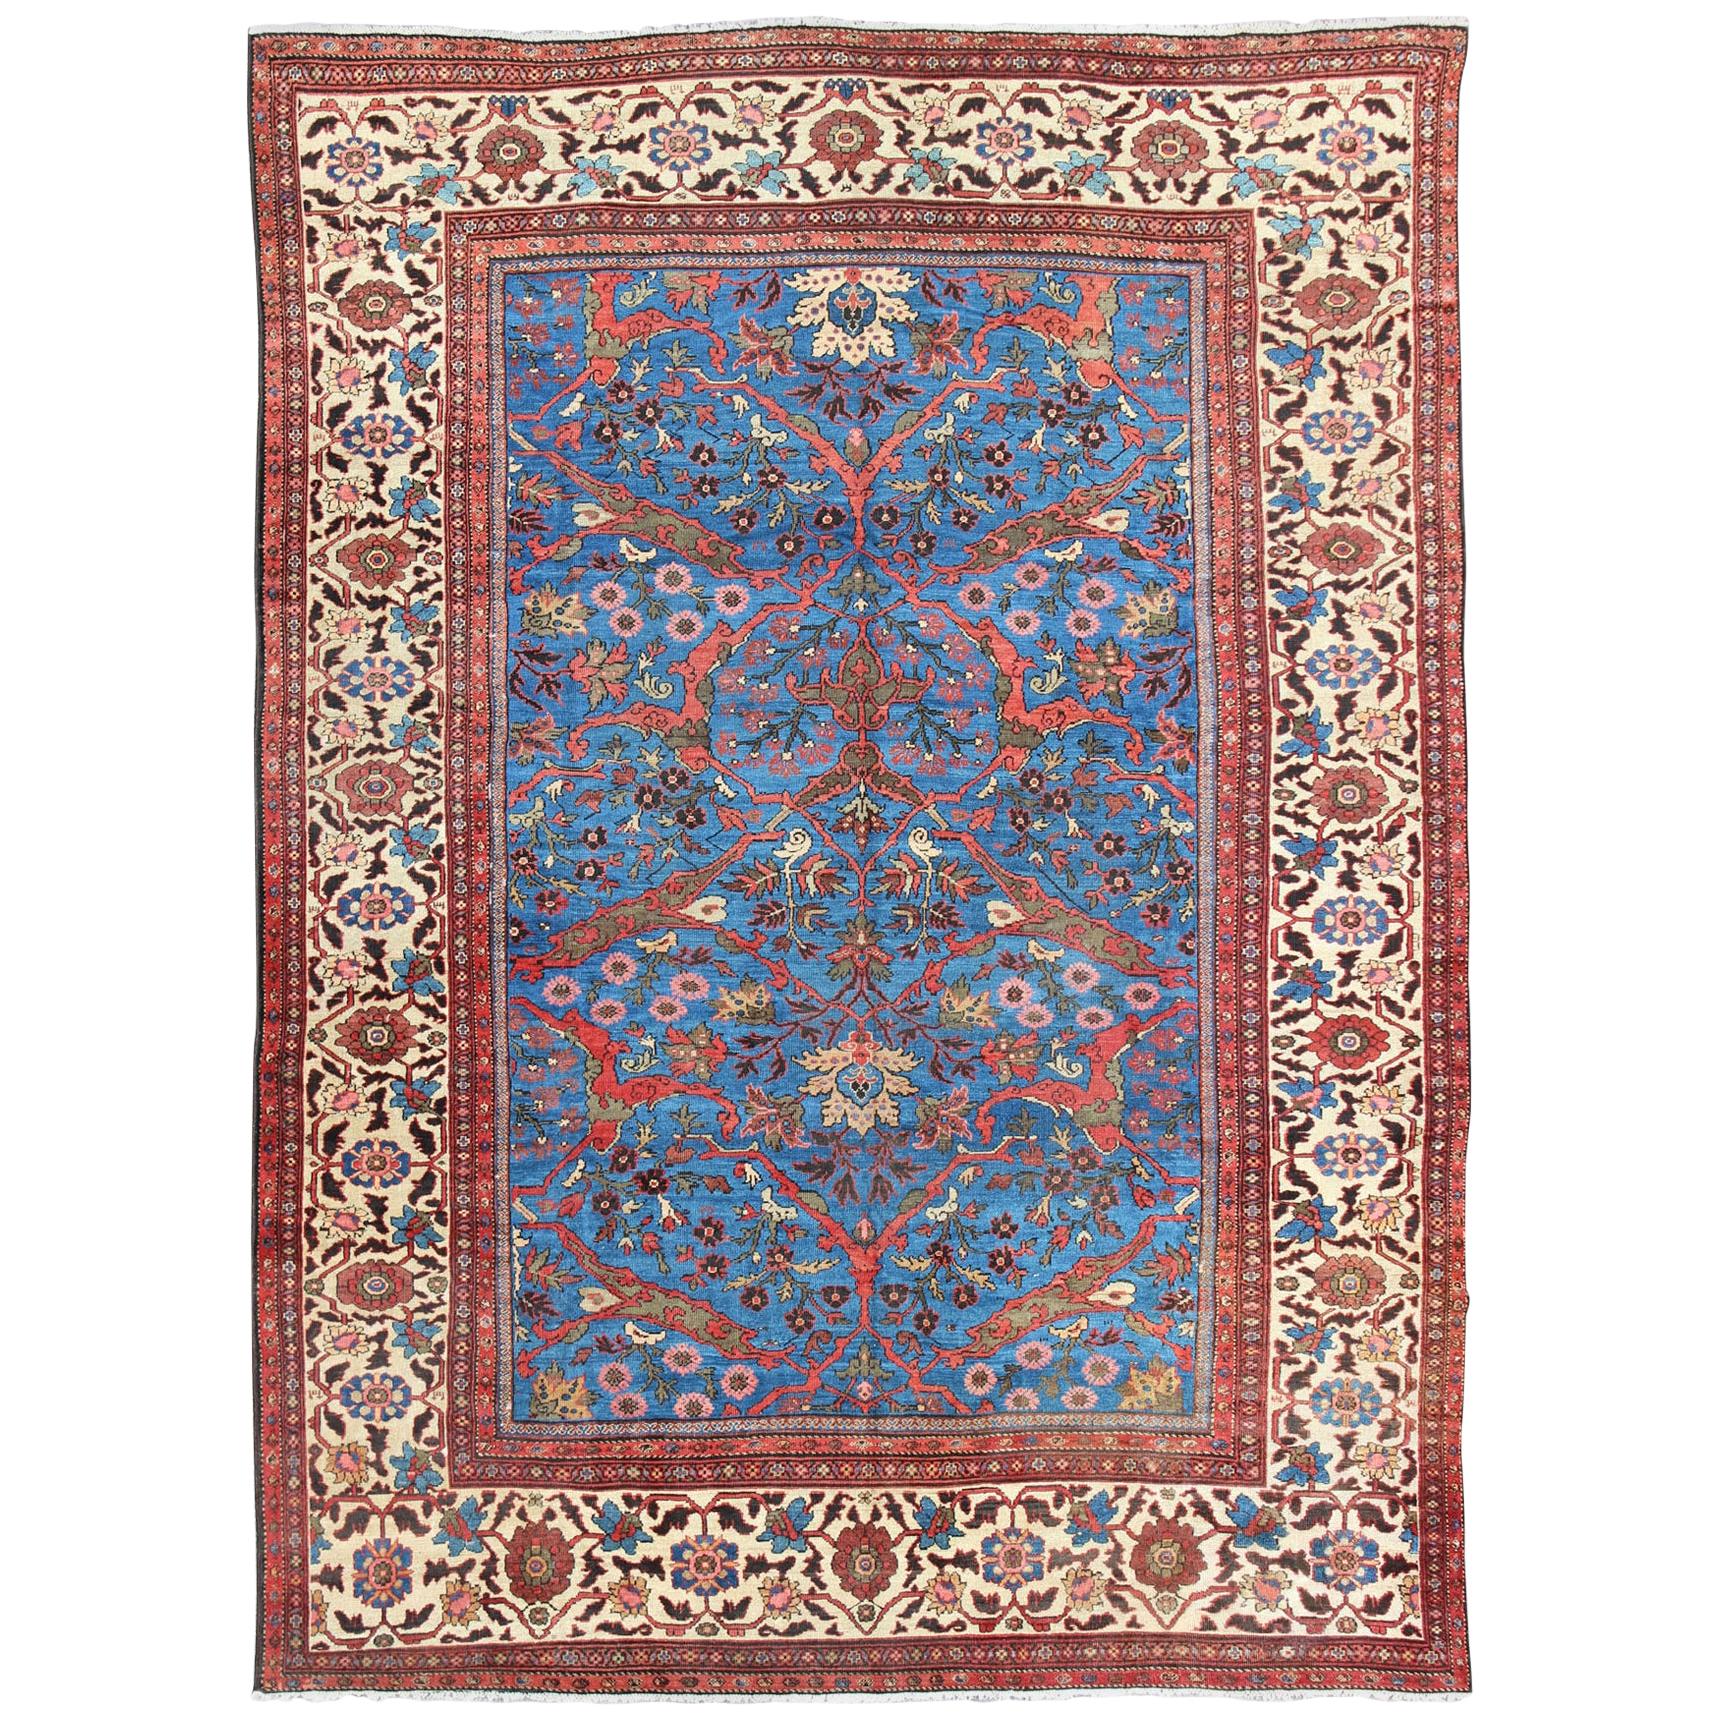 Amazing Antique Persian Sultanabad Rug in a Unique Persian Blue Background